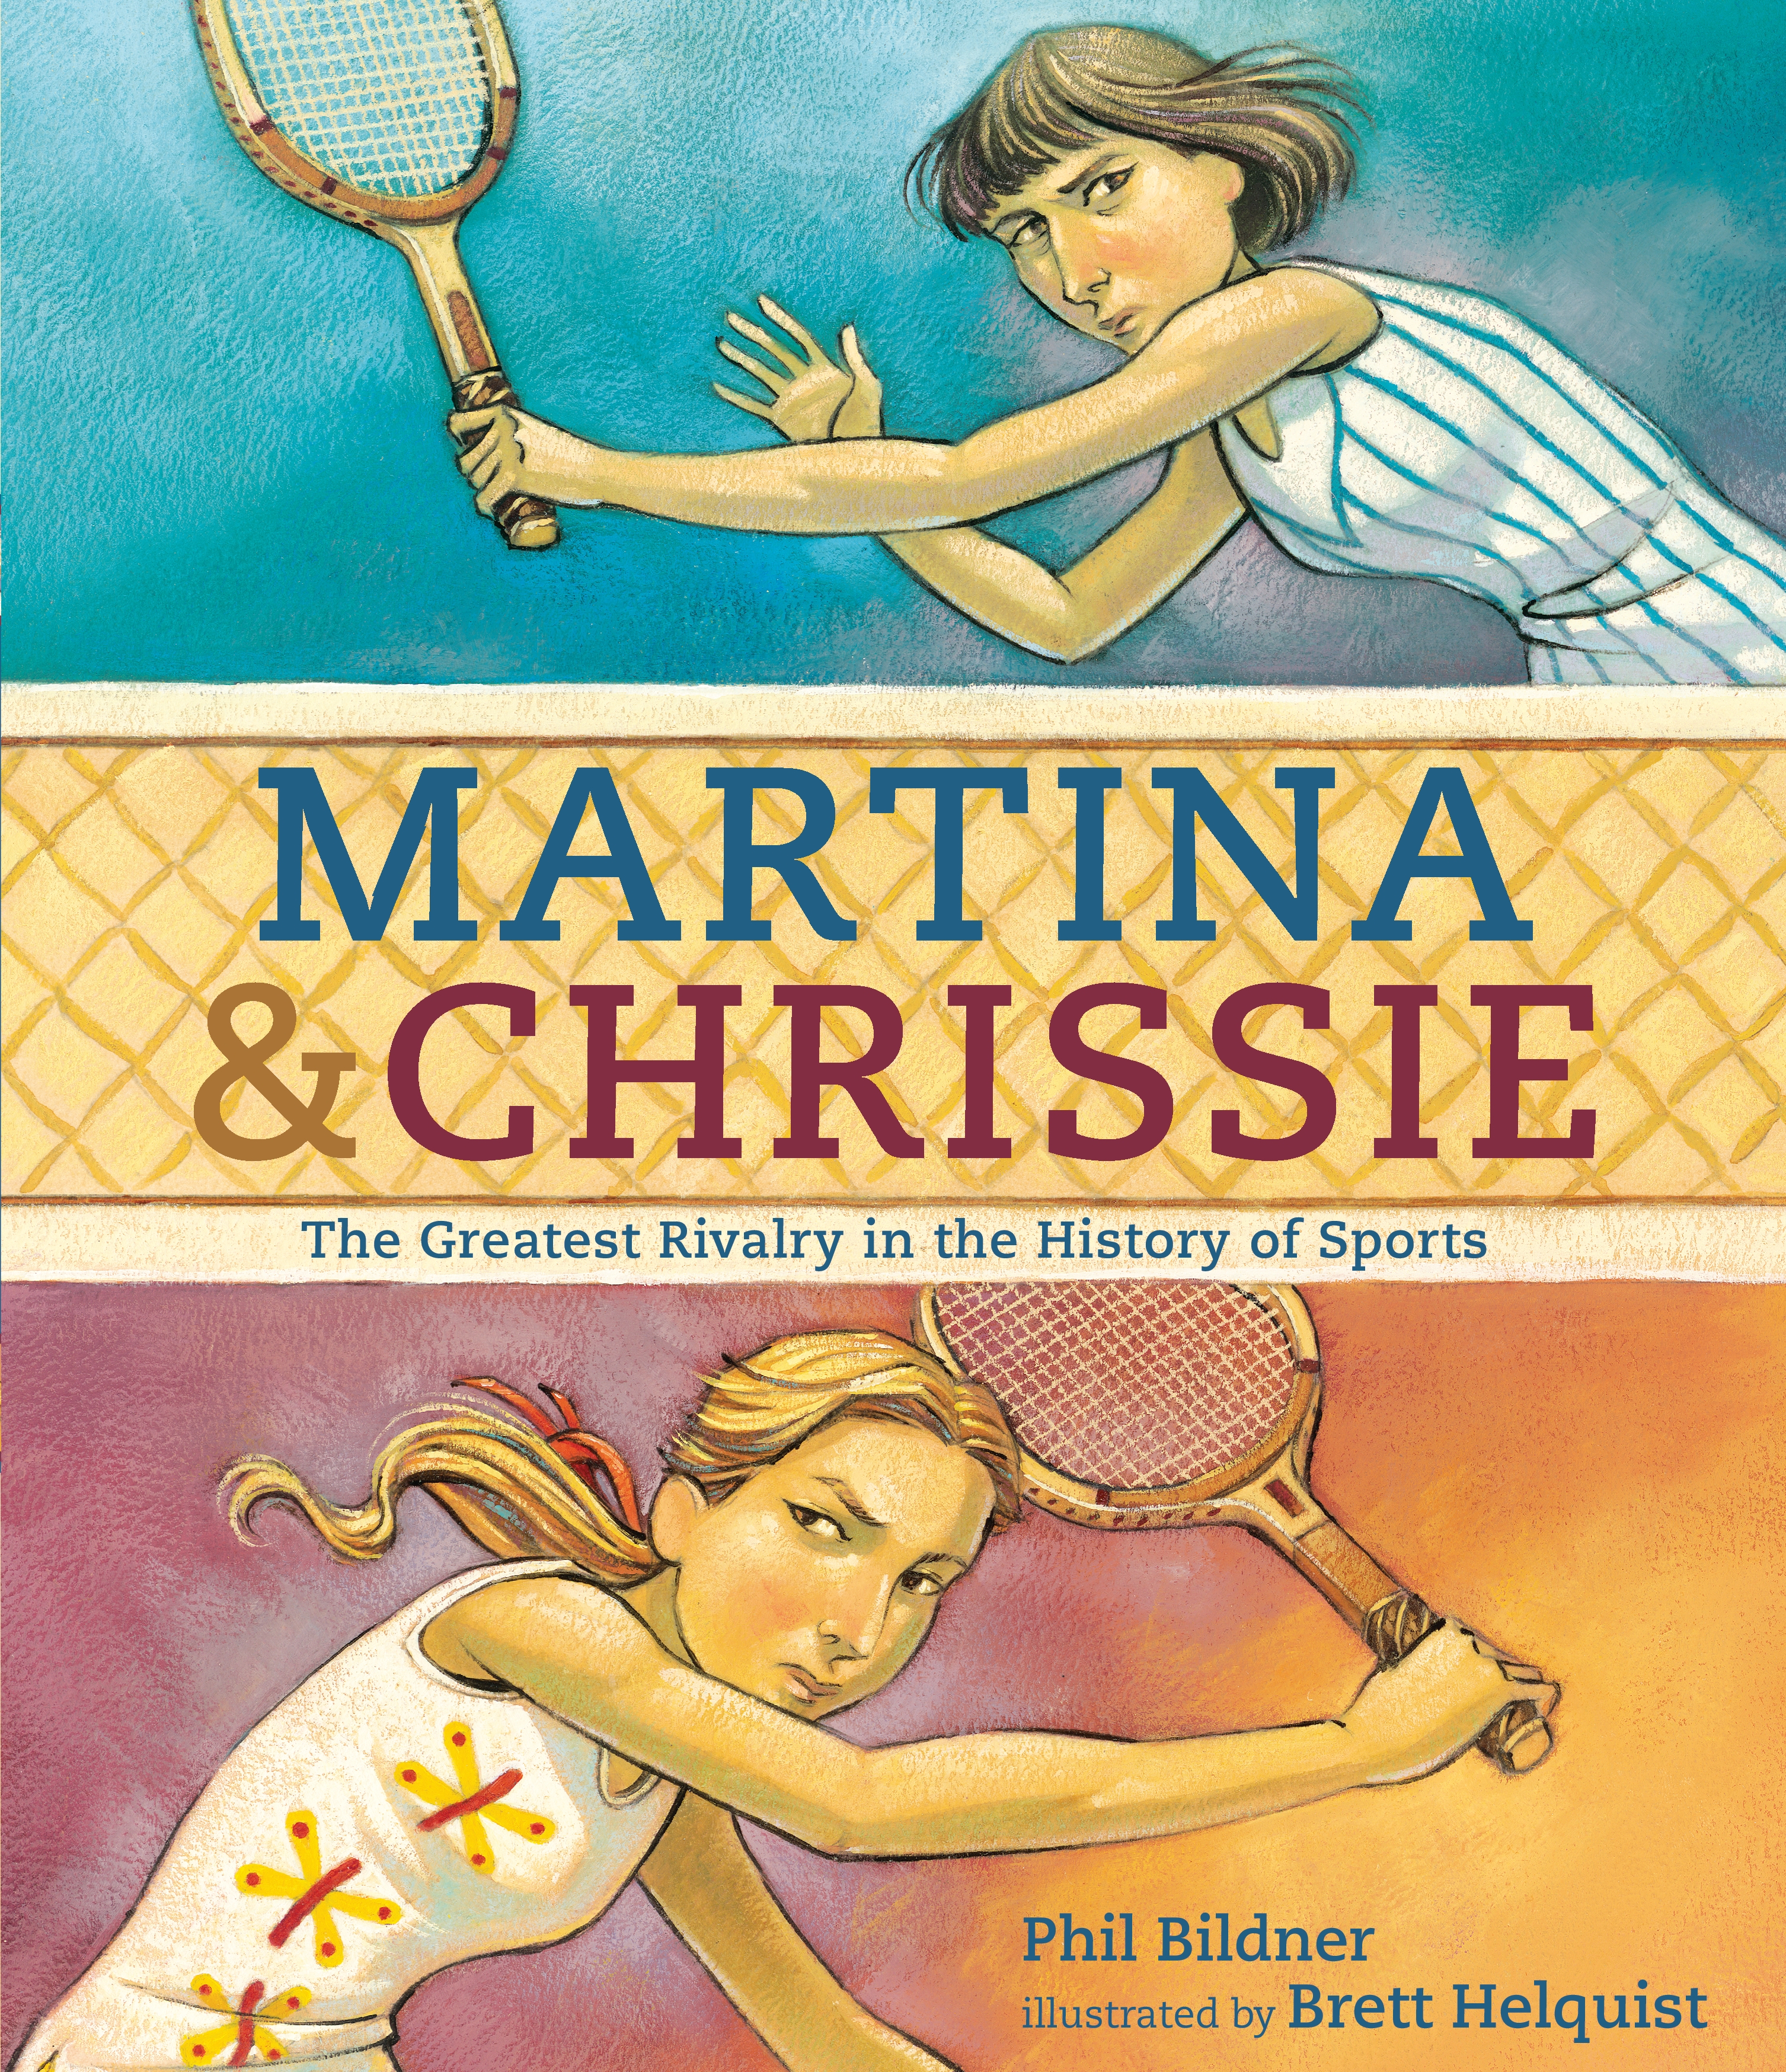 Sunday Story Time with Brett Helquist (Illustrator of Martina & Chrissie: The Greatest Rivalry in the History of Sports)